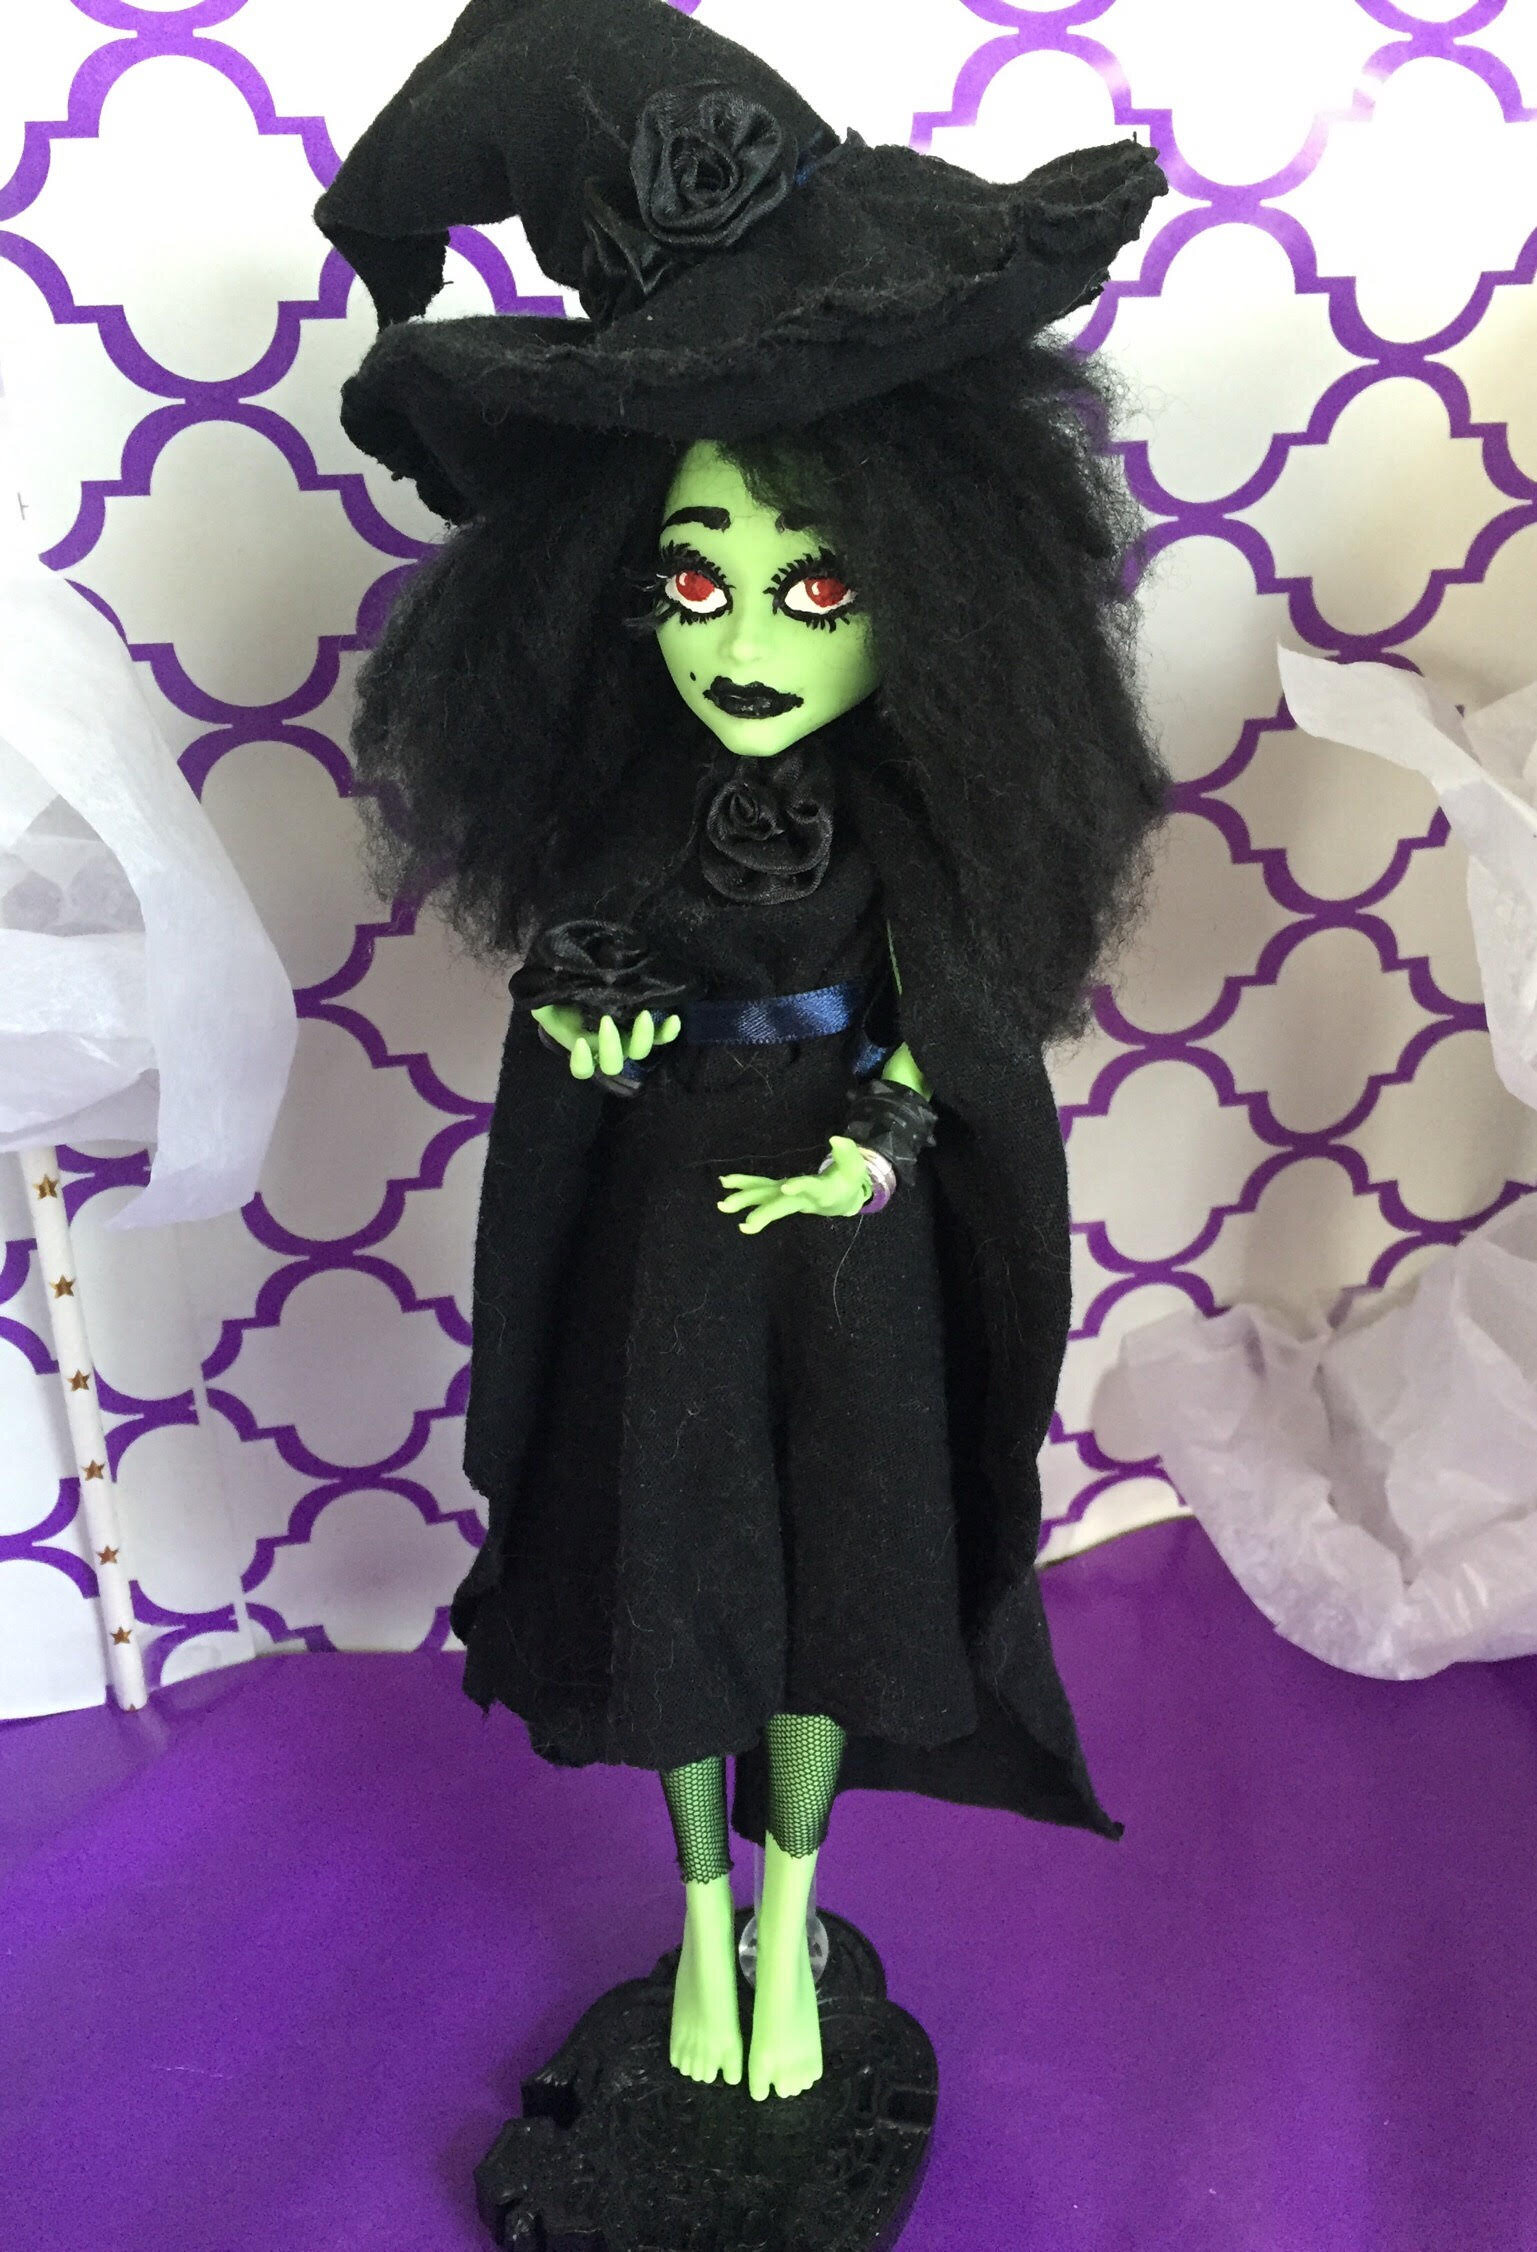 Witch Doll - Finished.jpg